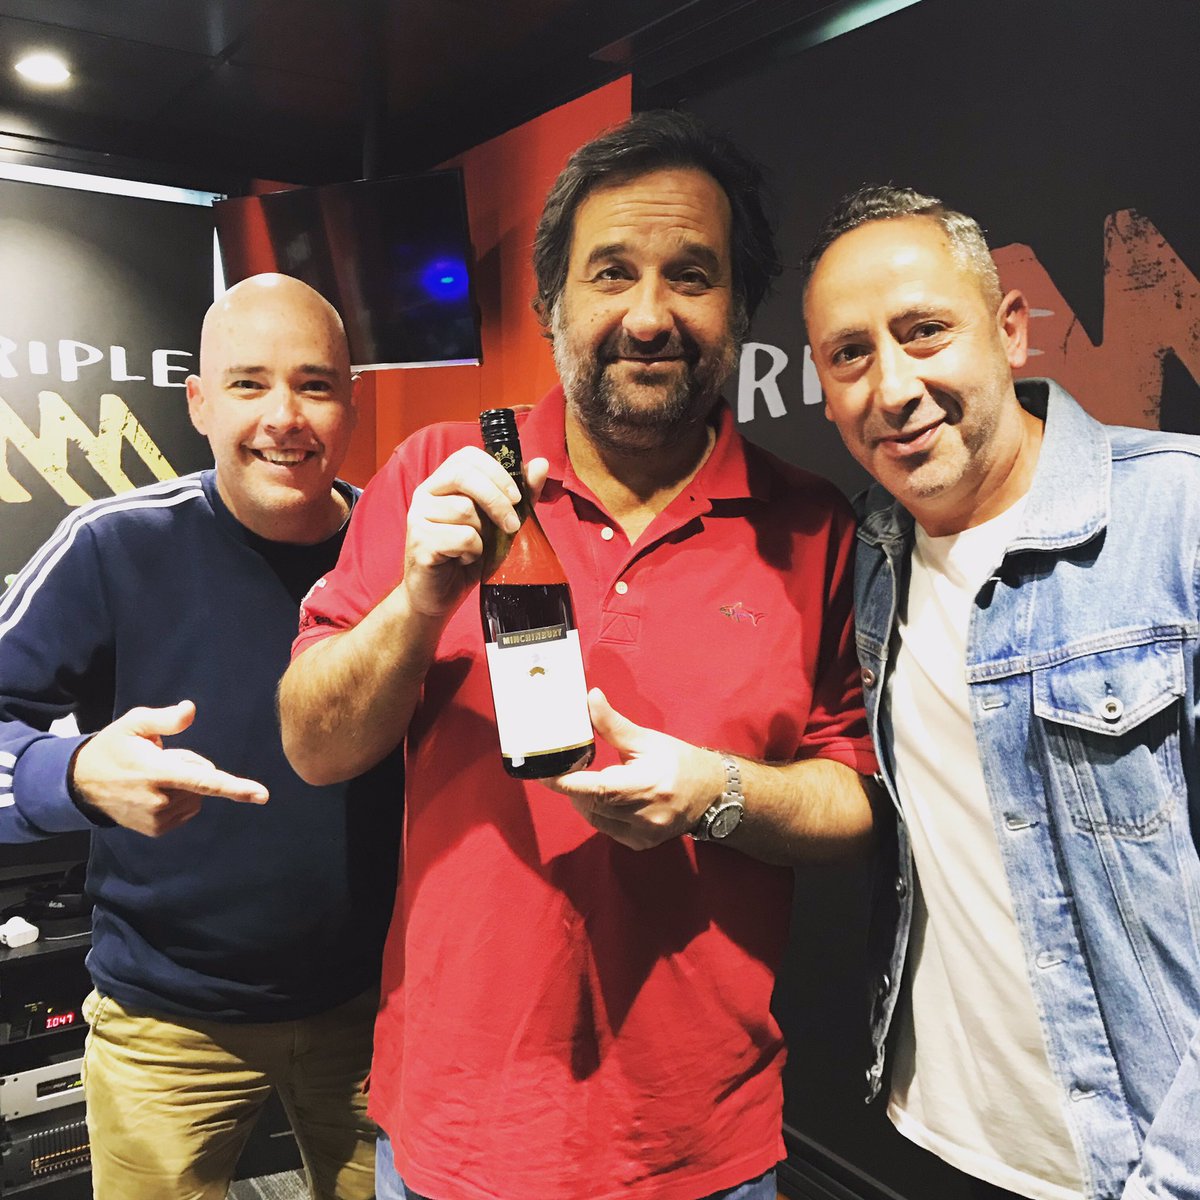 Talking all things @thewinebluffs festival shows in #Adelaide and #Melbourne on @molloyshow plus taste testing a $7.99 pinot noir from Dan’s. Will cellar it for a few years when it’ll be worth $14.99 #adelaidefringe #MelbourneComedyFestival #wine #comedy #thisisaheybossshow